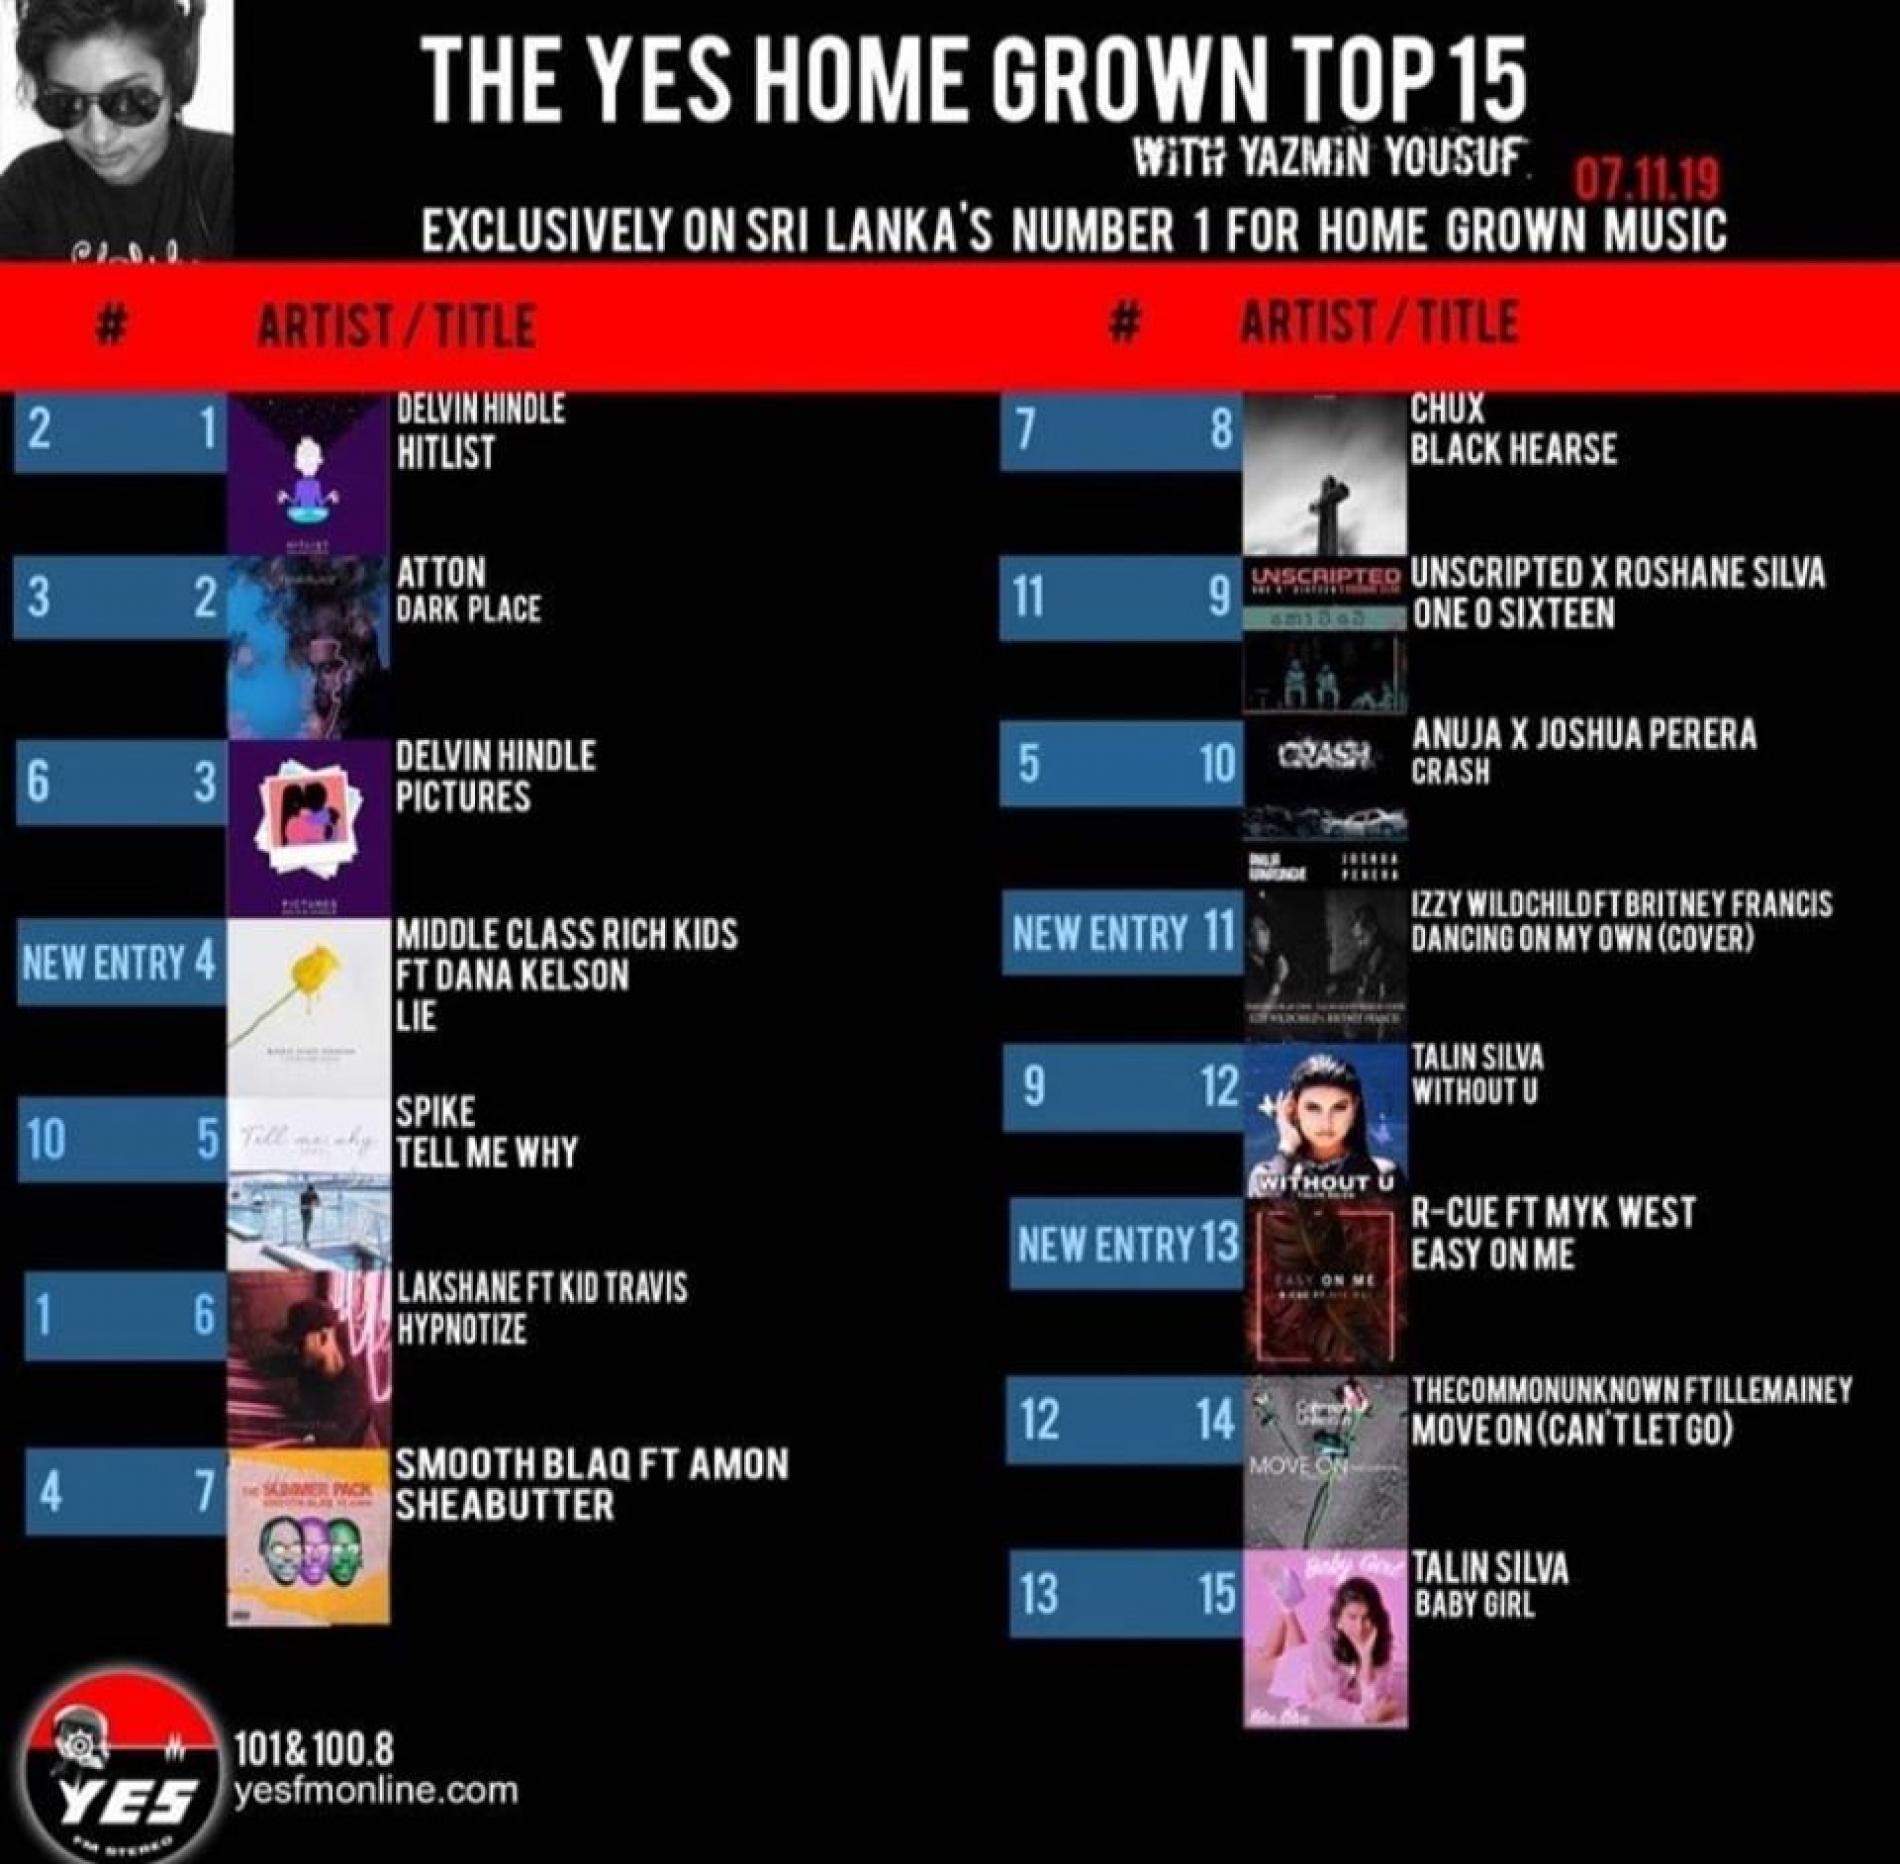 Delvin Hindle’s Hitlist Is At Number 1 On The YES Home Grown Top 15!